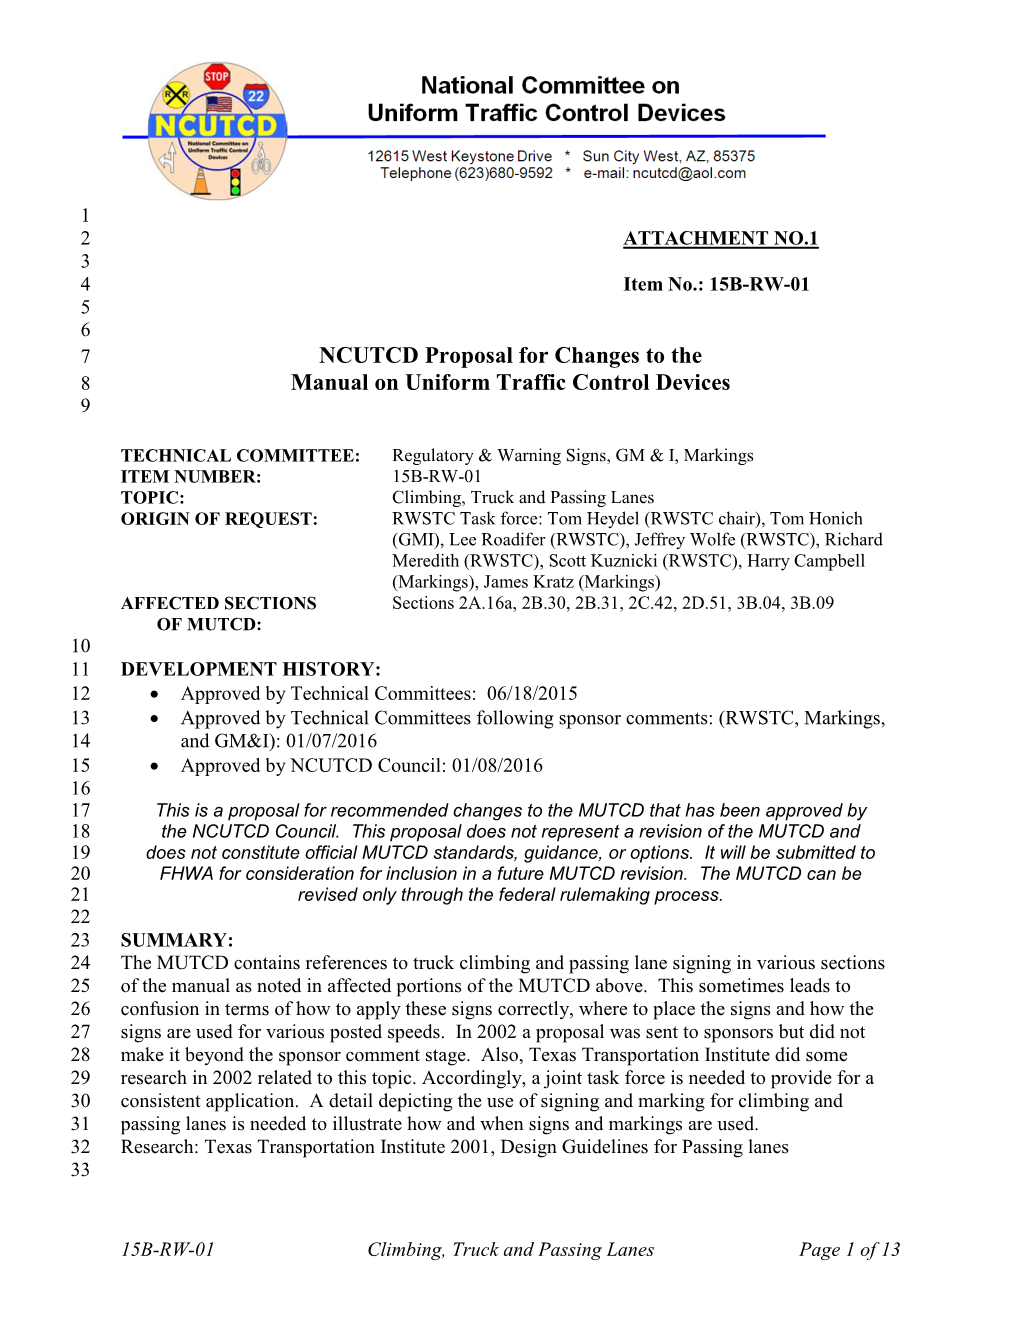 15B-RW-01 5 6 7 NCUTCD Proposal for Changes to the 8 Manual on Uniform Traffic Control Devices 9